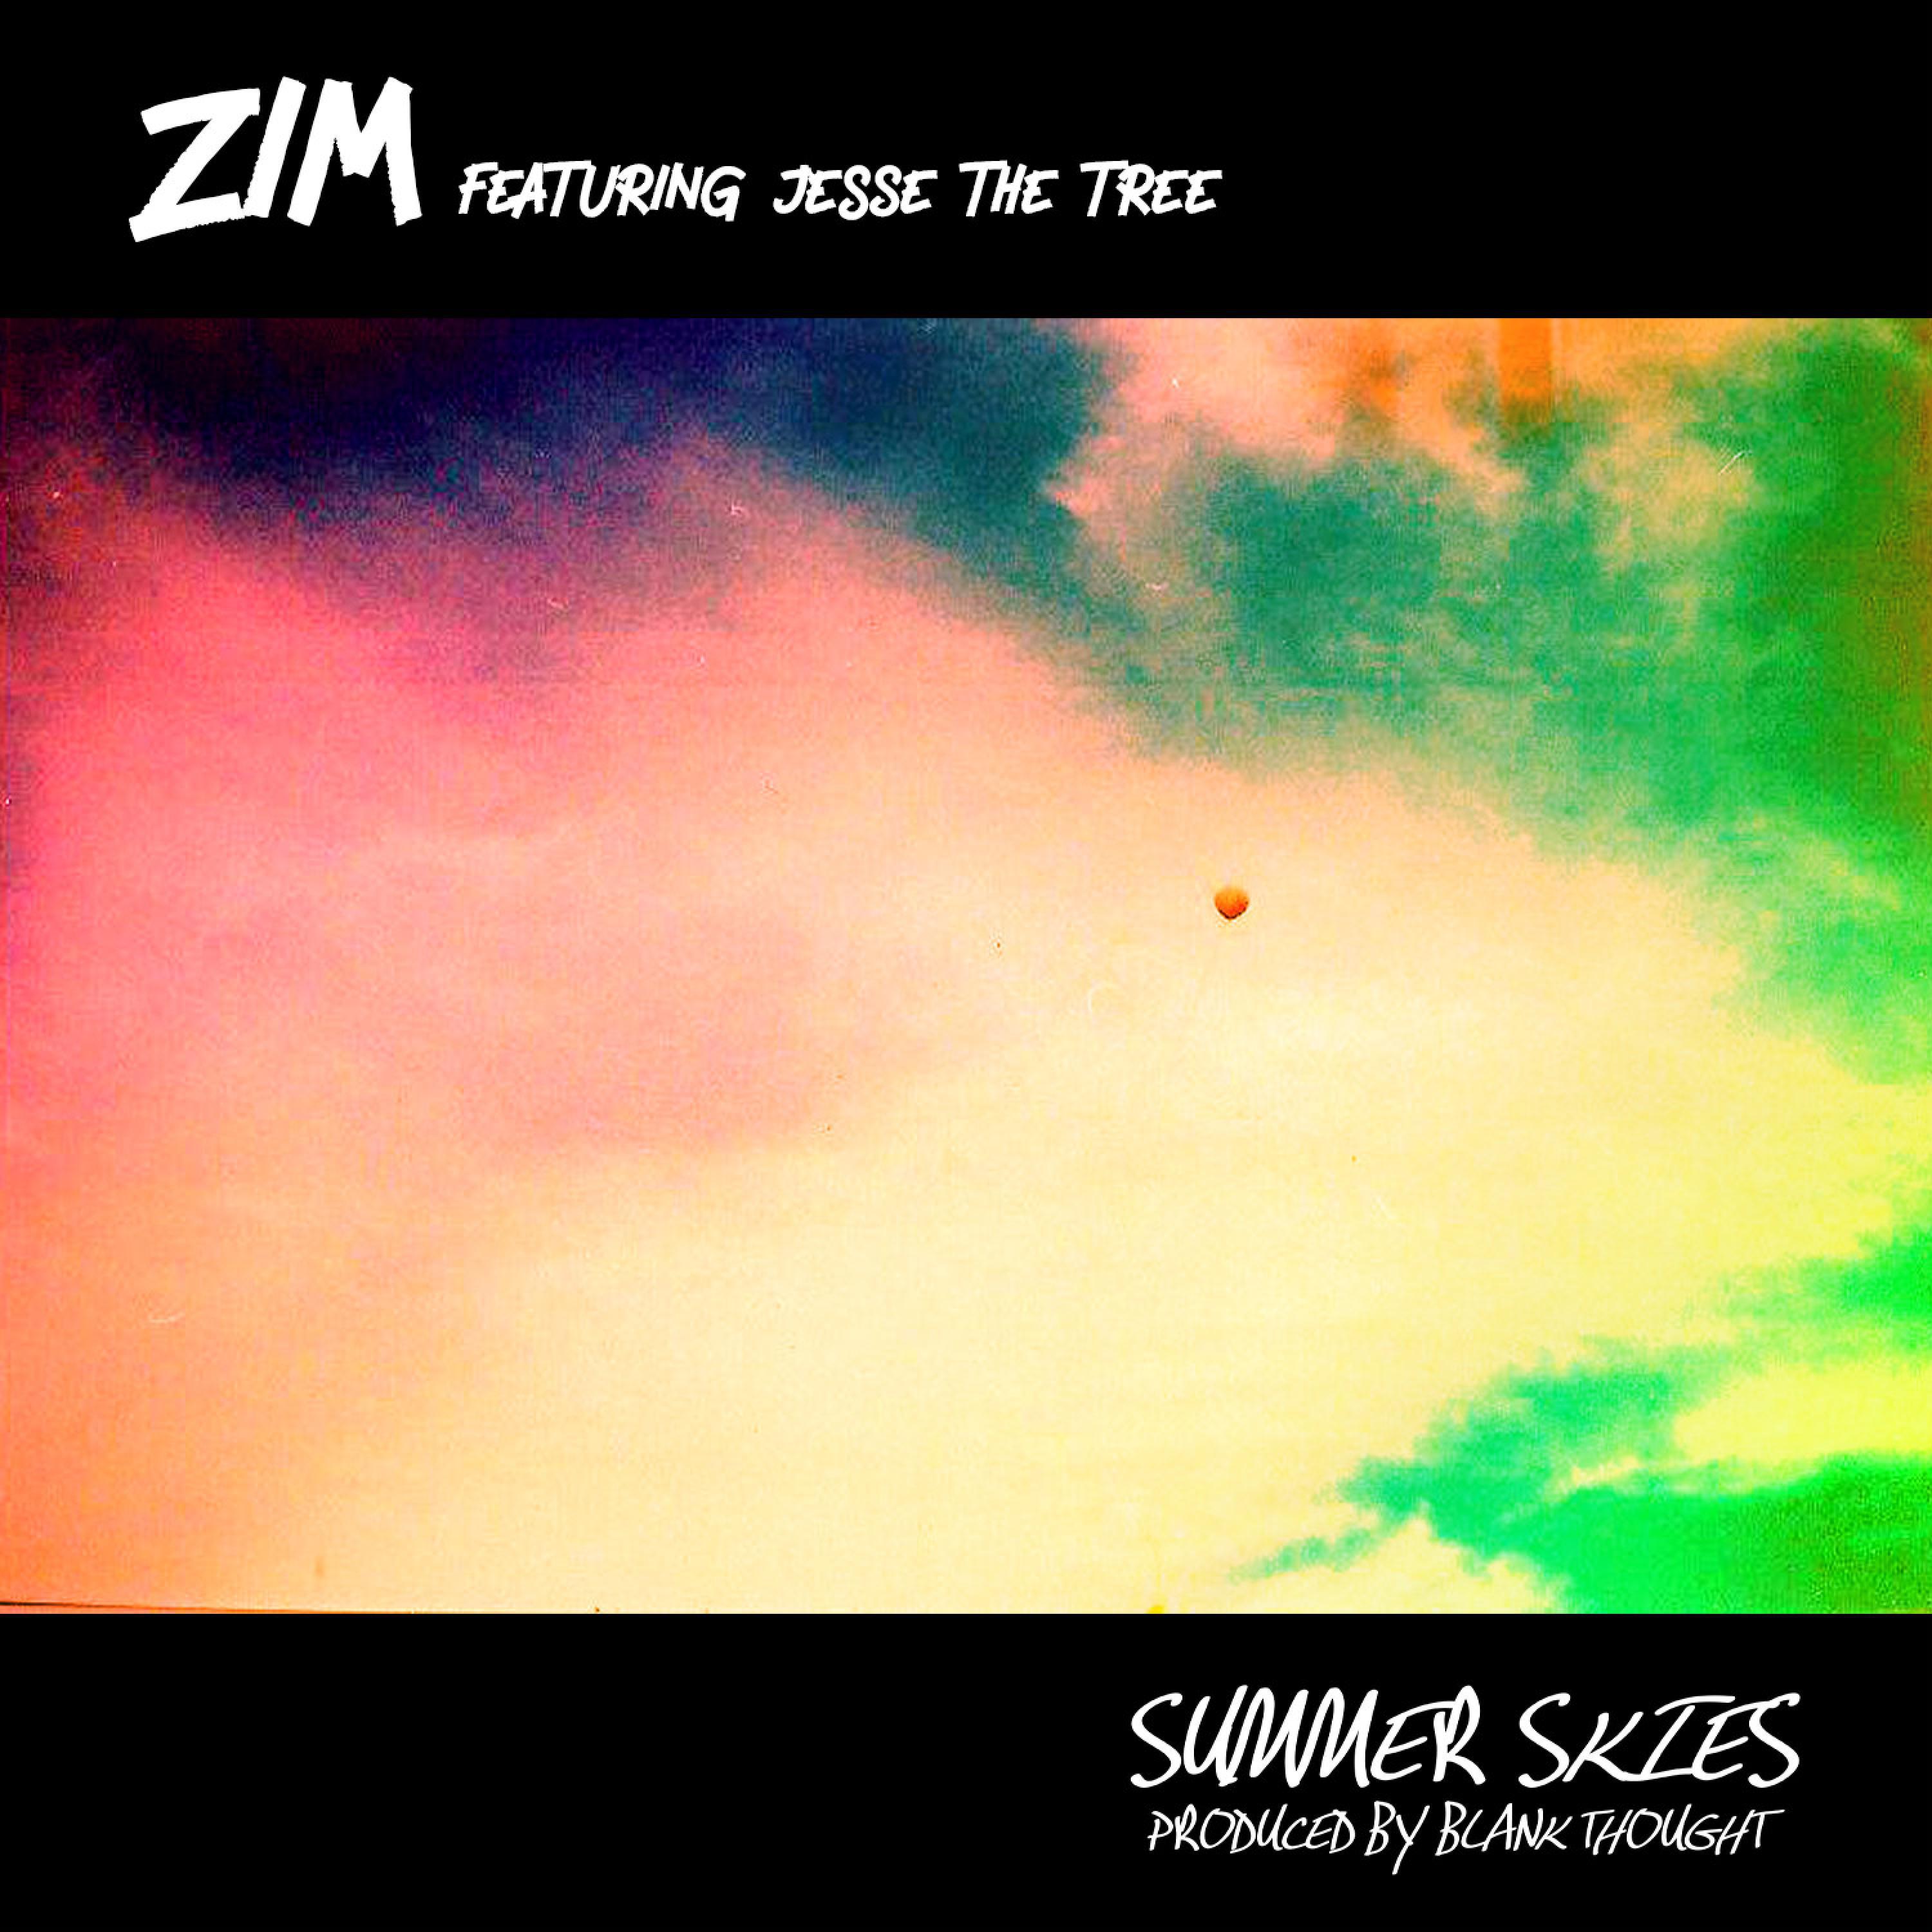 Zim - Summer Skies (feat. Jesse the Tree & blank thought)